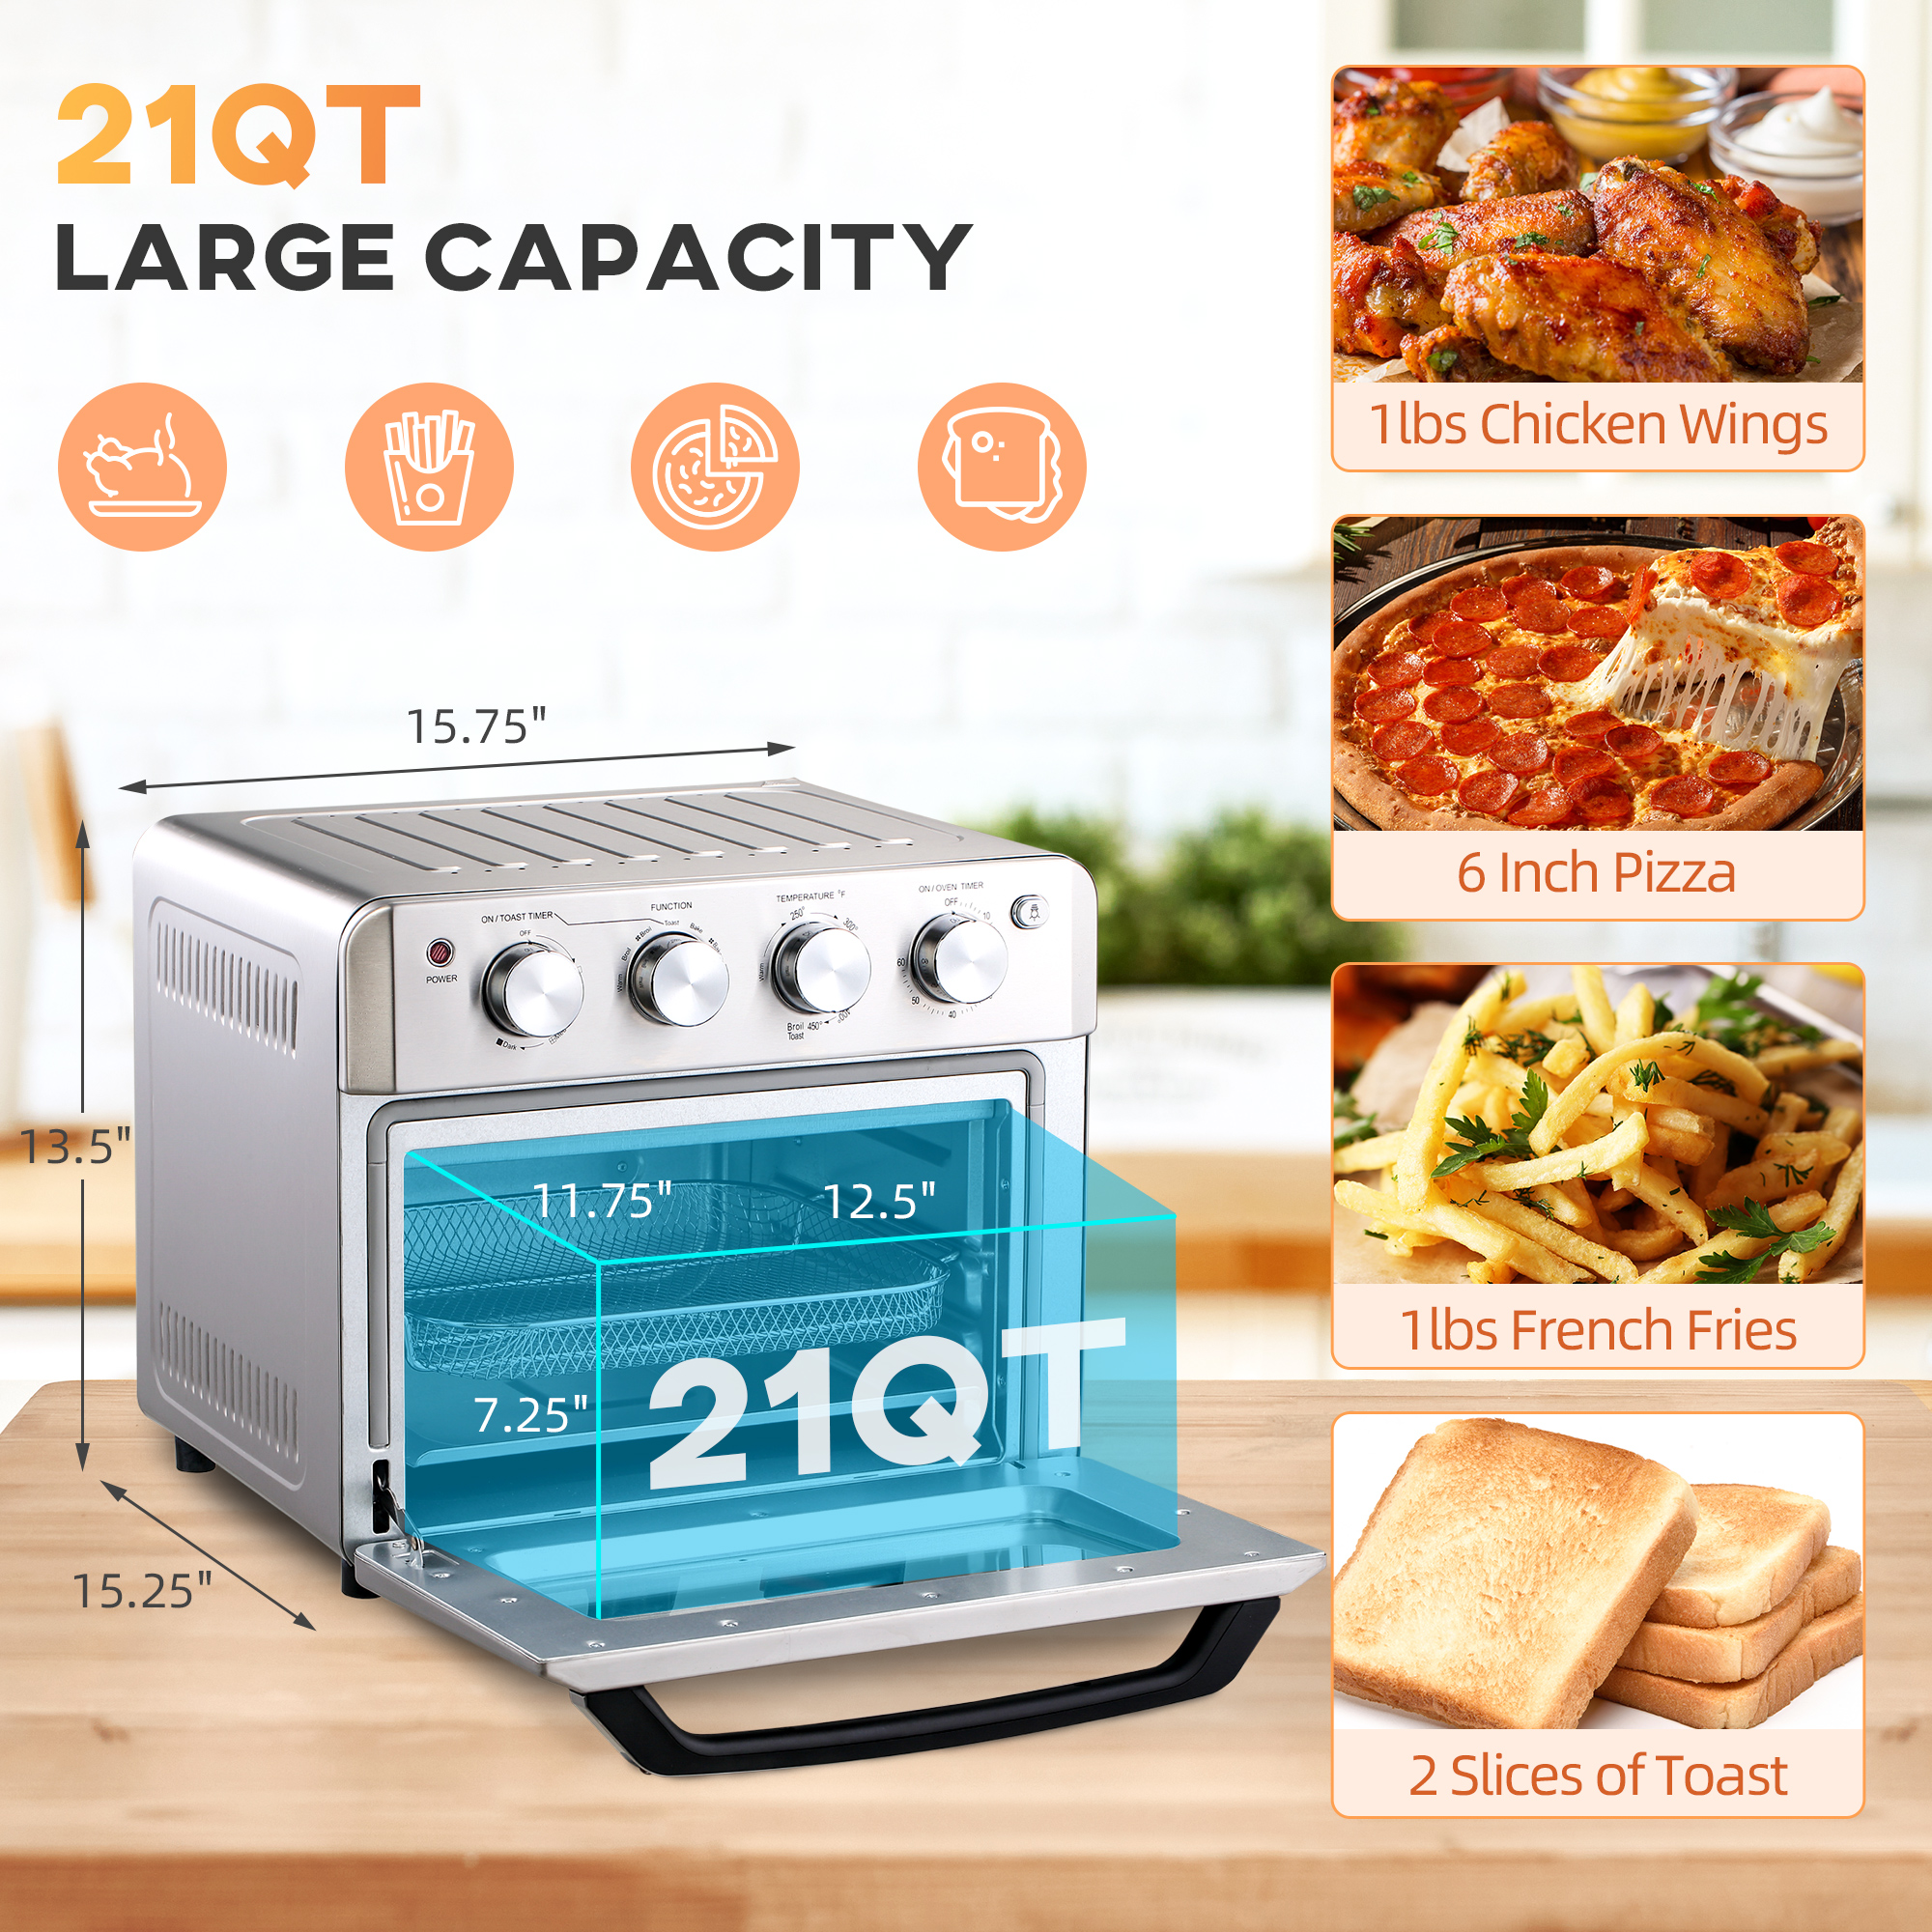 HOMCOM 7-in-1 Toaster Oven, 21 Qt 4-Slice Convection Oven with Warm ...